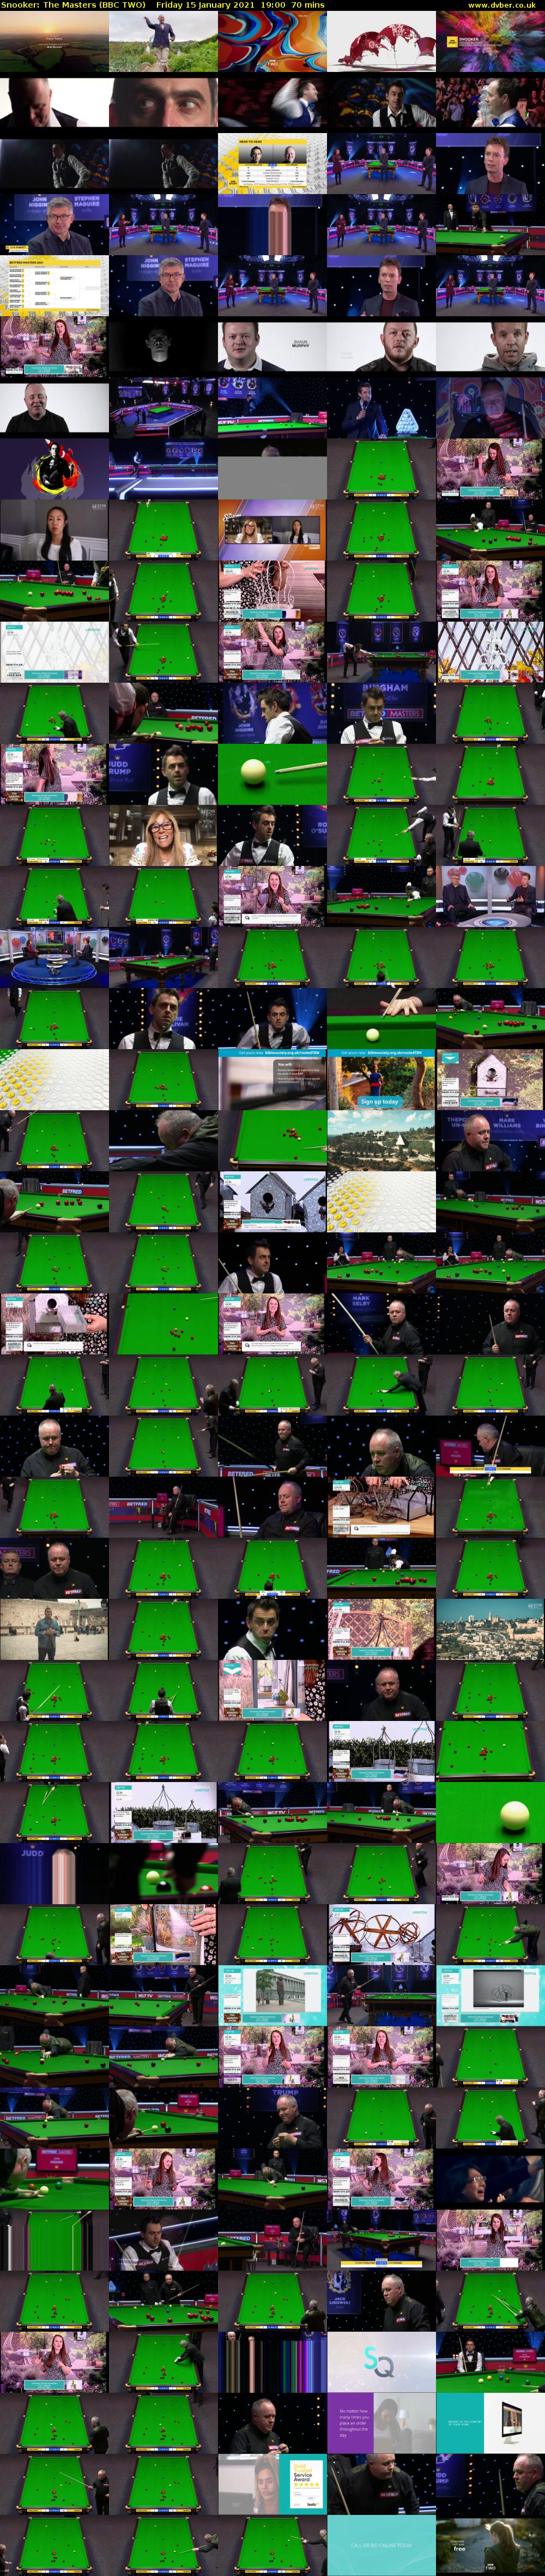 Snooker: The Masters (BBC TWO) Friday 15 January 2021 19:00 - 20:10